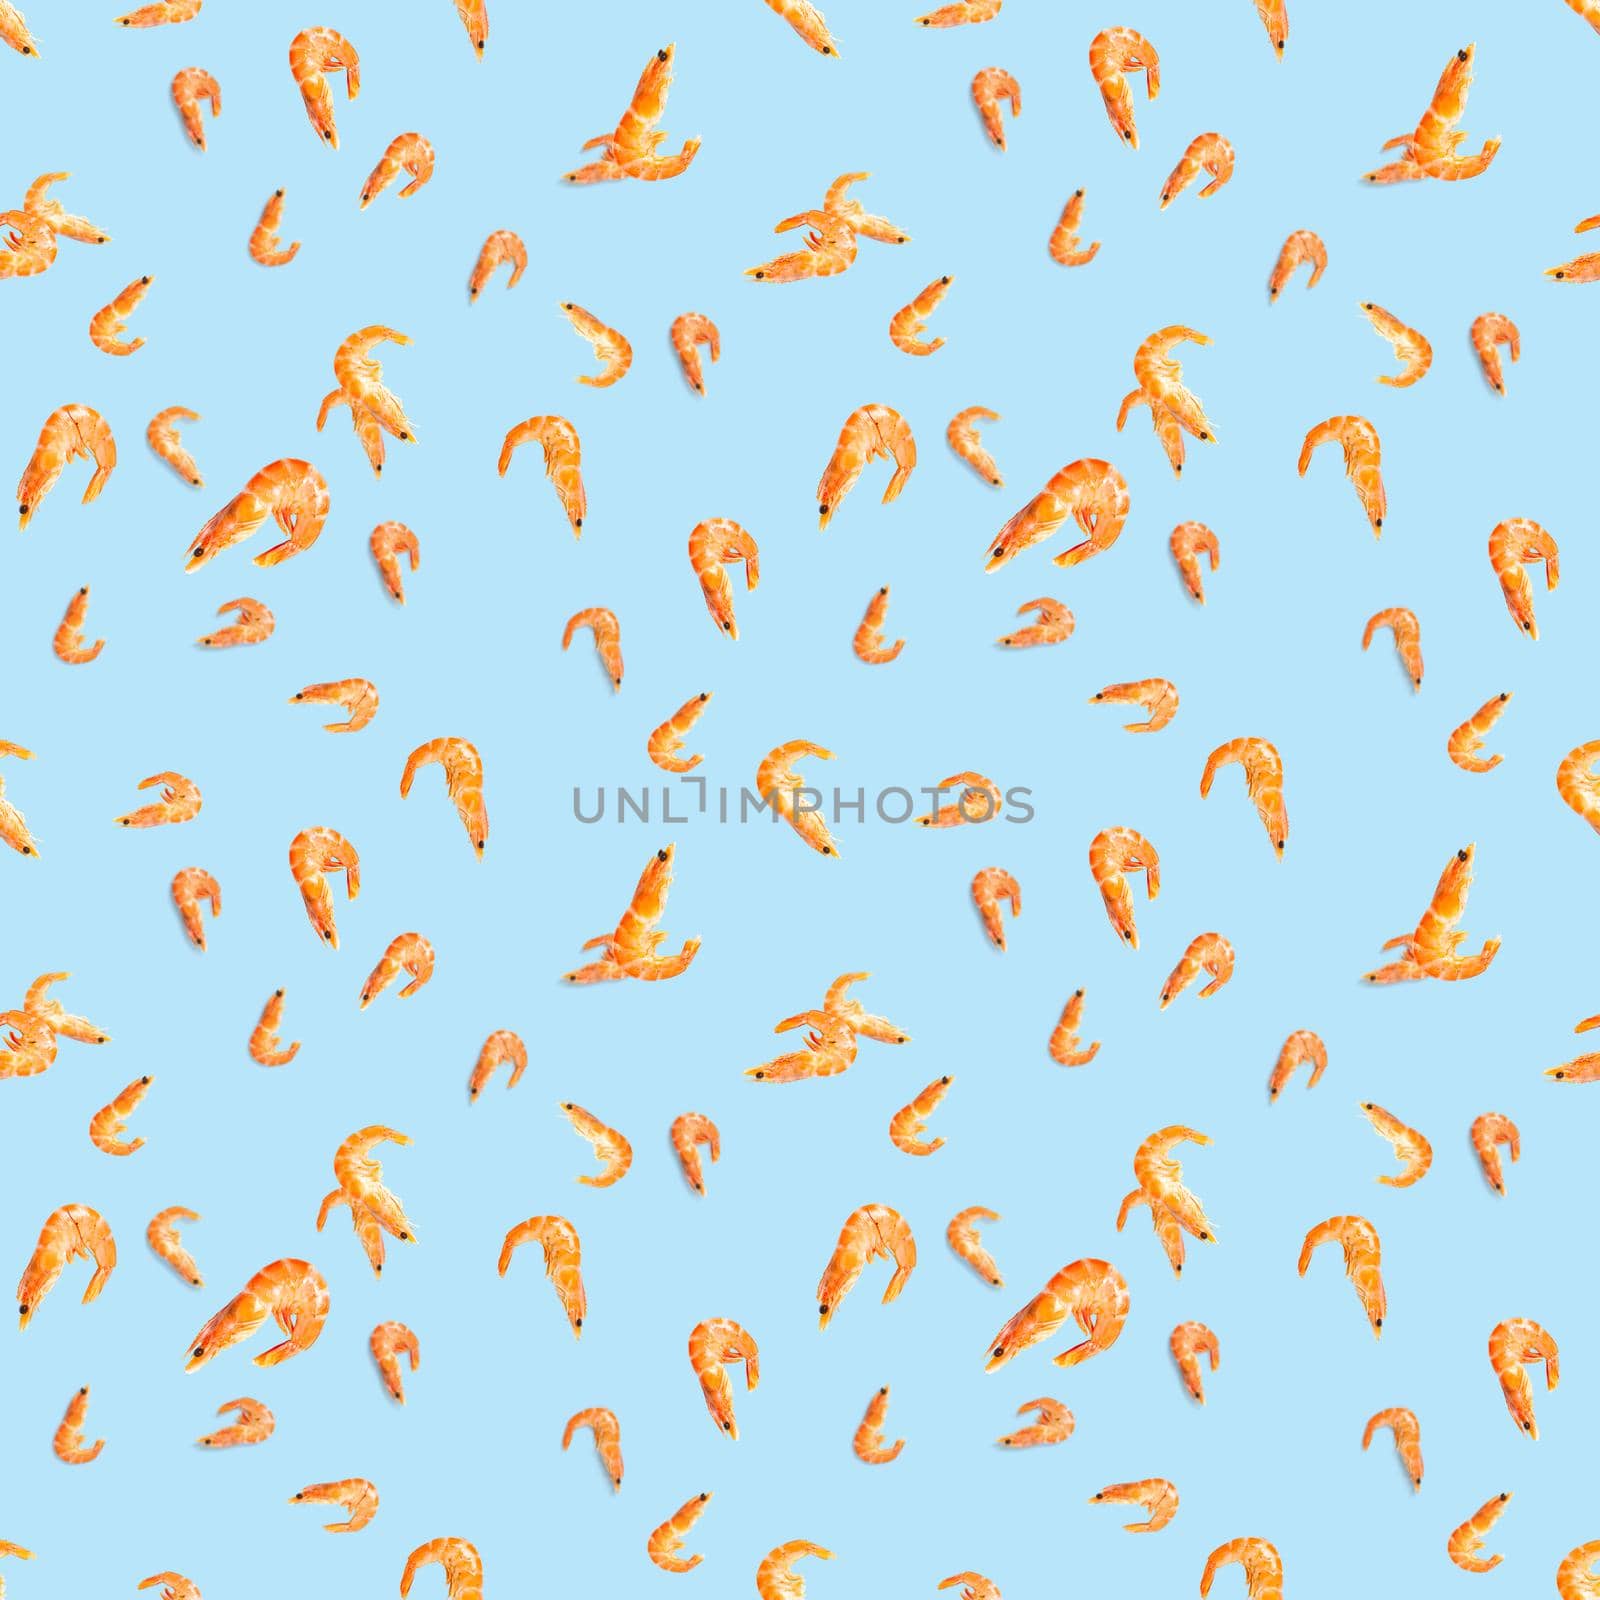 Tiger shrimp. Seamless pattern made from Prawn isolated on a blue background. Seafood seamless pattern with shrimps. seafood pattern by PhotoTime